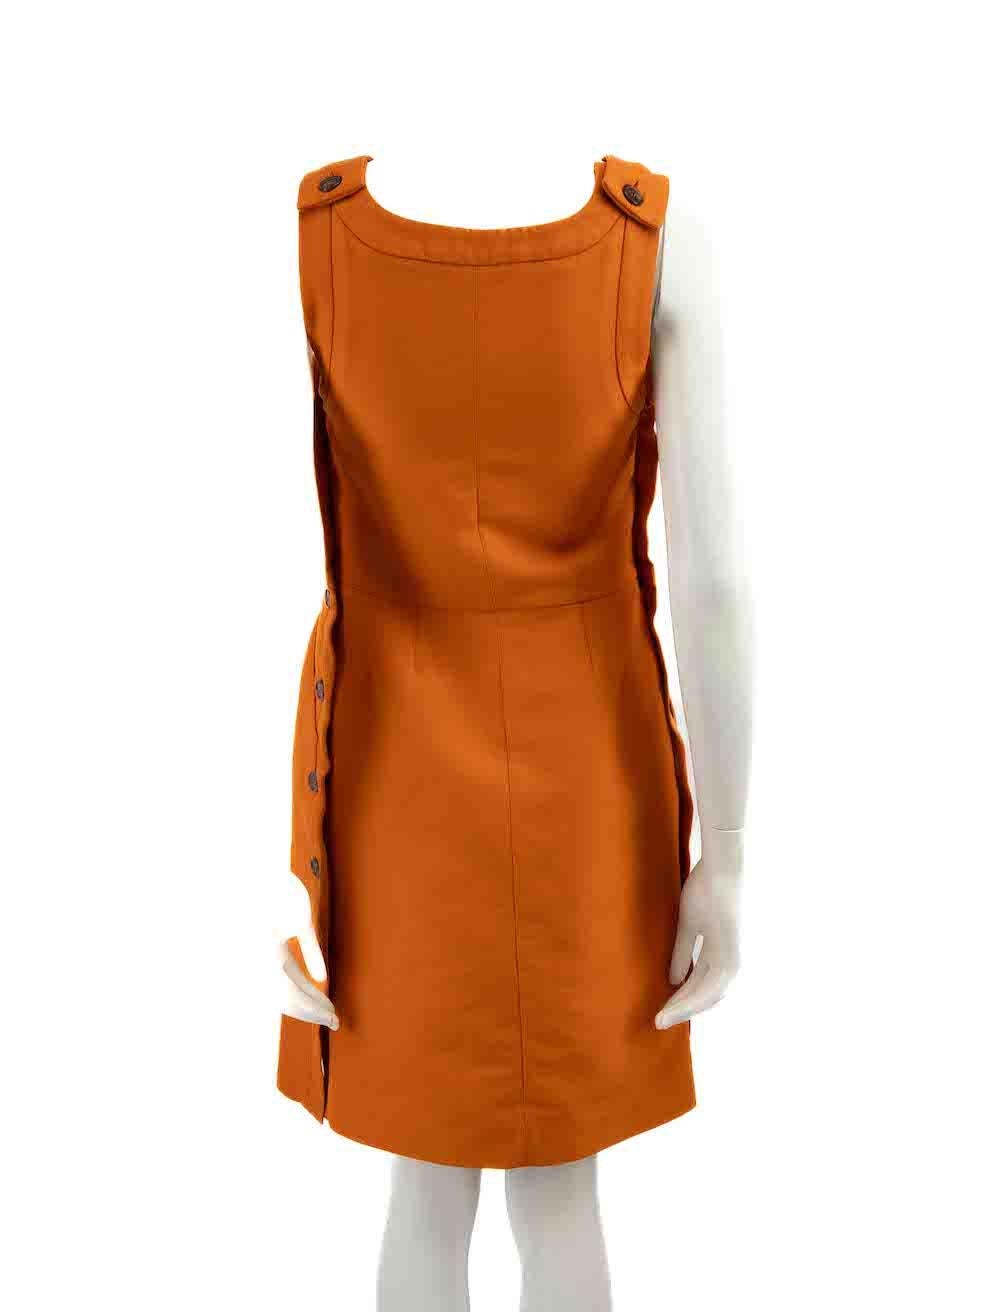 Marni Orange Side Button Up Detail Dress Size XS In Good Condition For Sale In London, GB